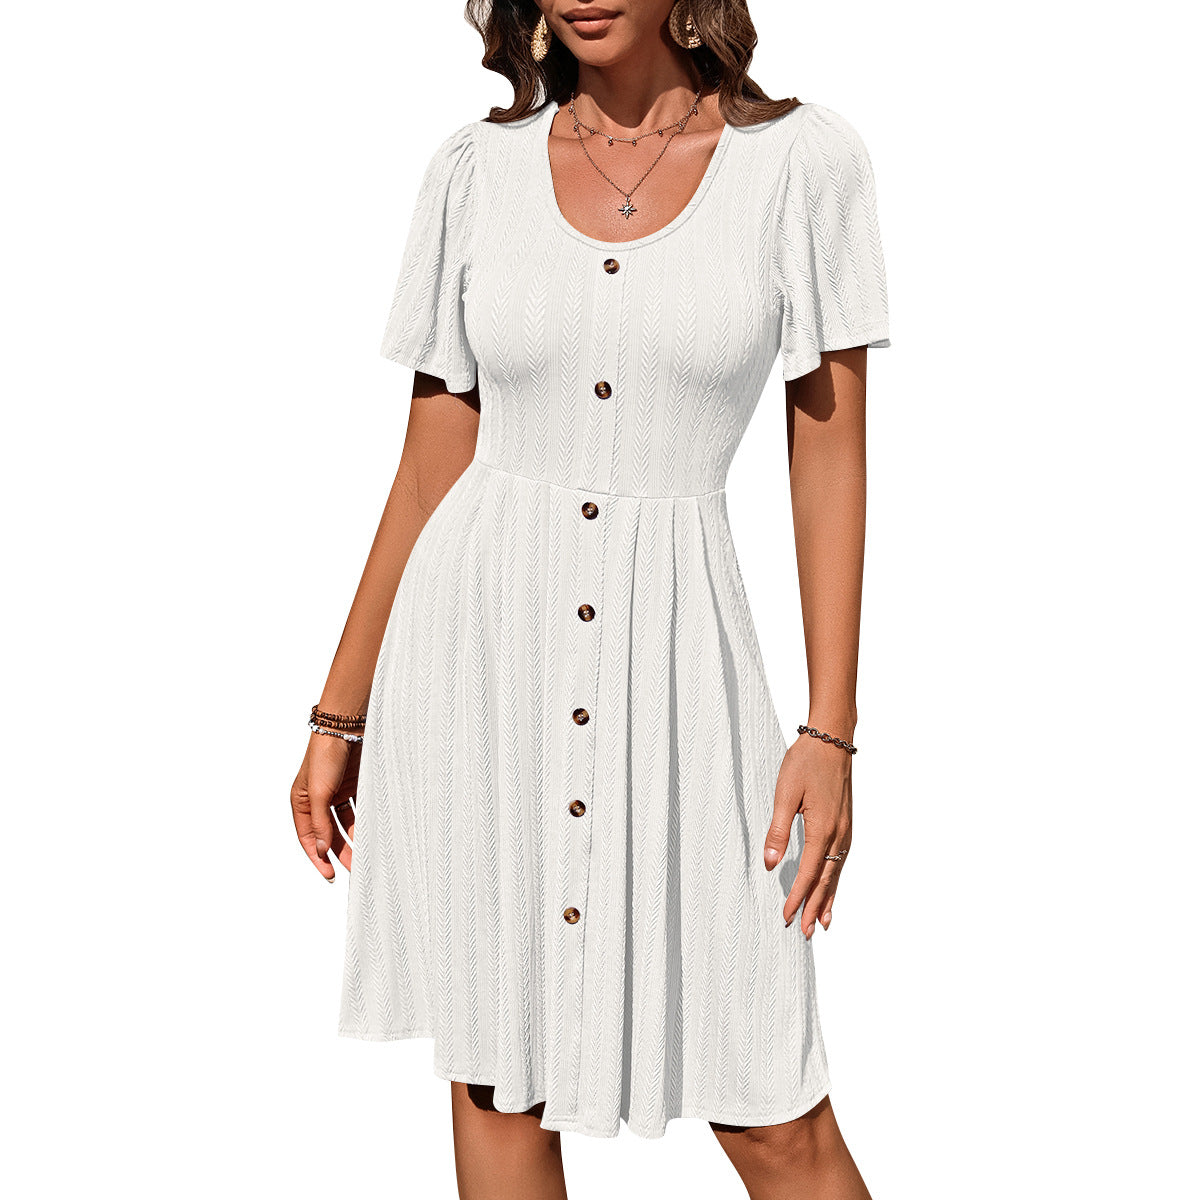 Lovemi -  Summer U-neck Short-sleeved Dress With Button Design Fashion Casual Solid Color Holiday Dress For Womens Clothing